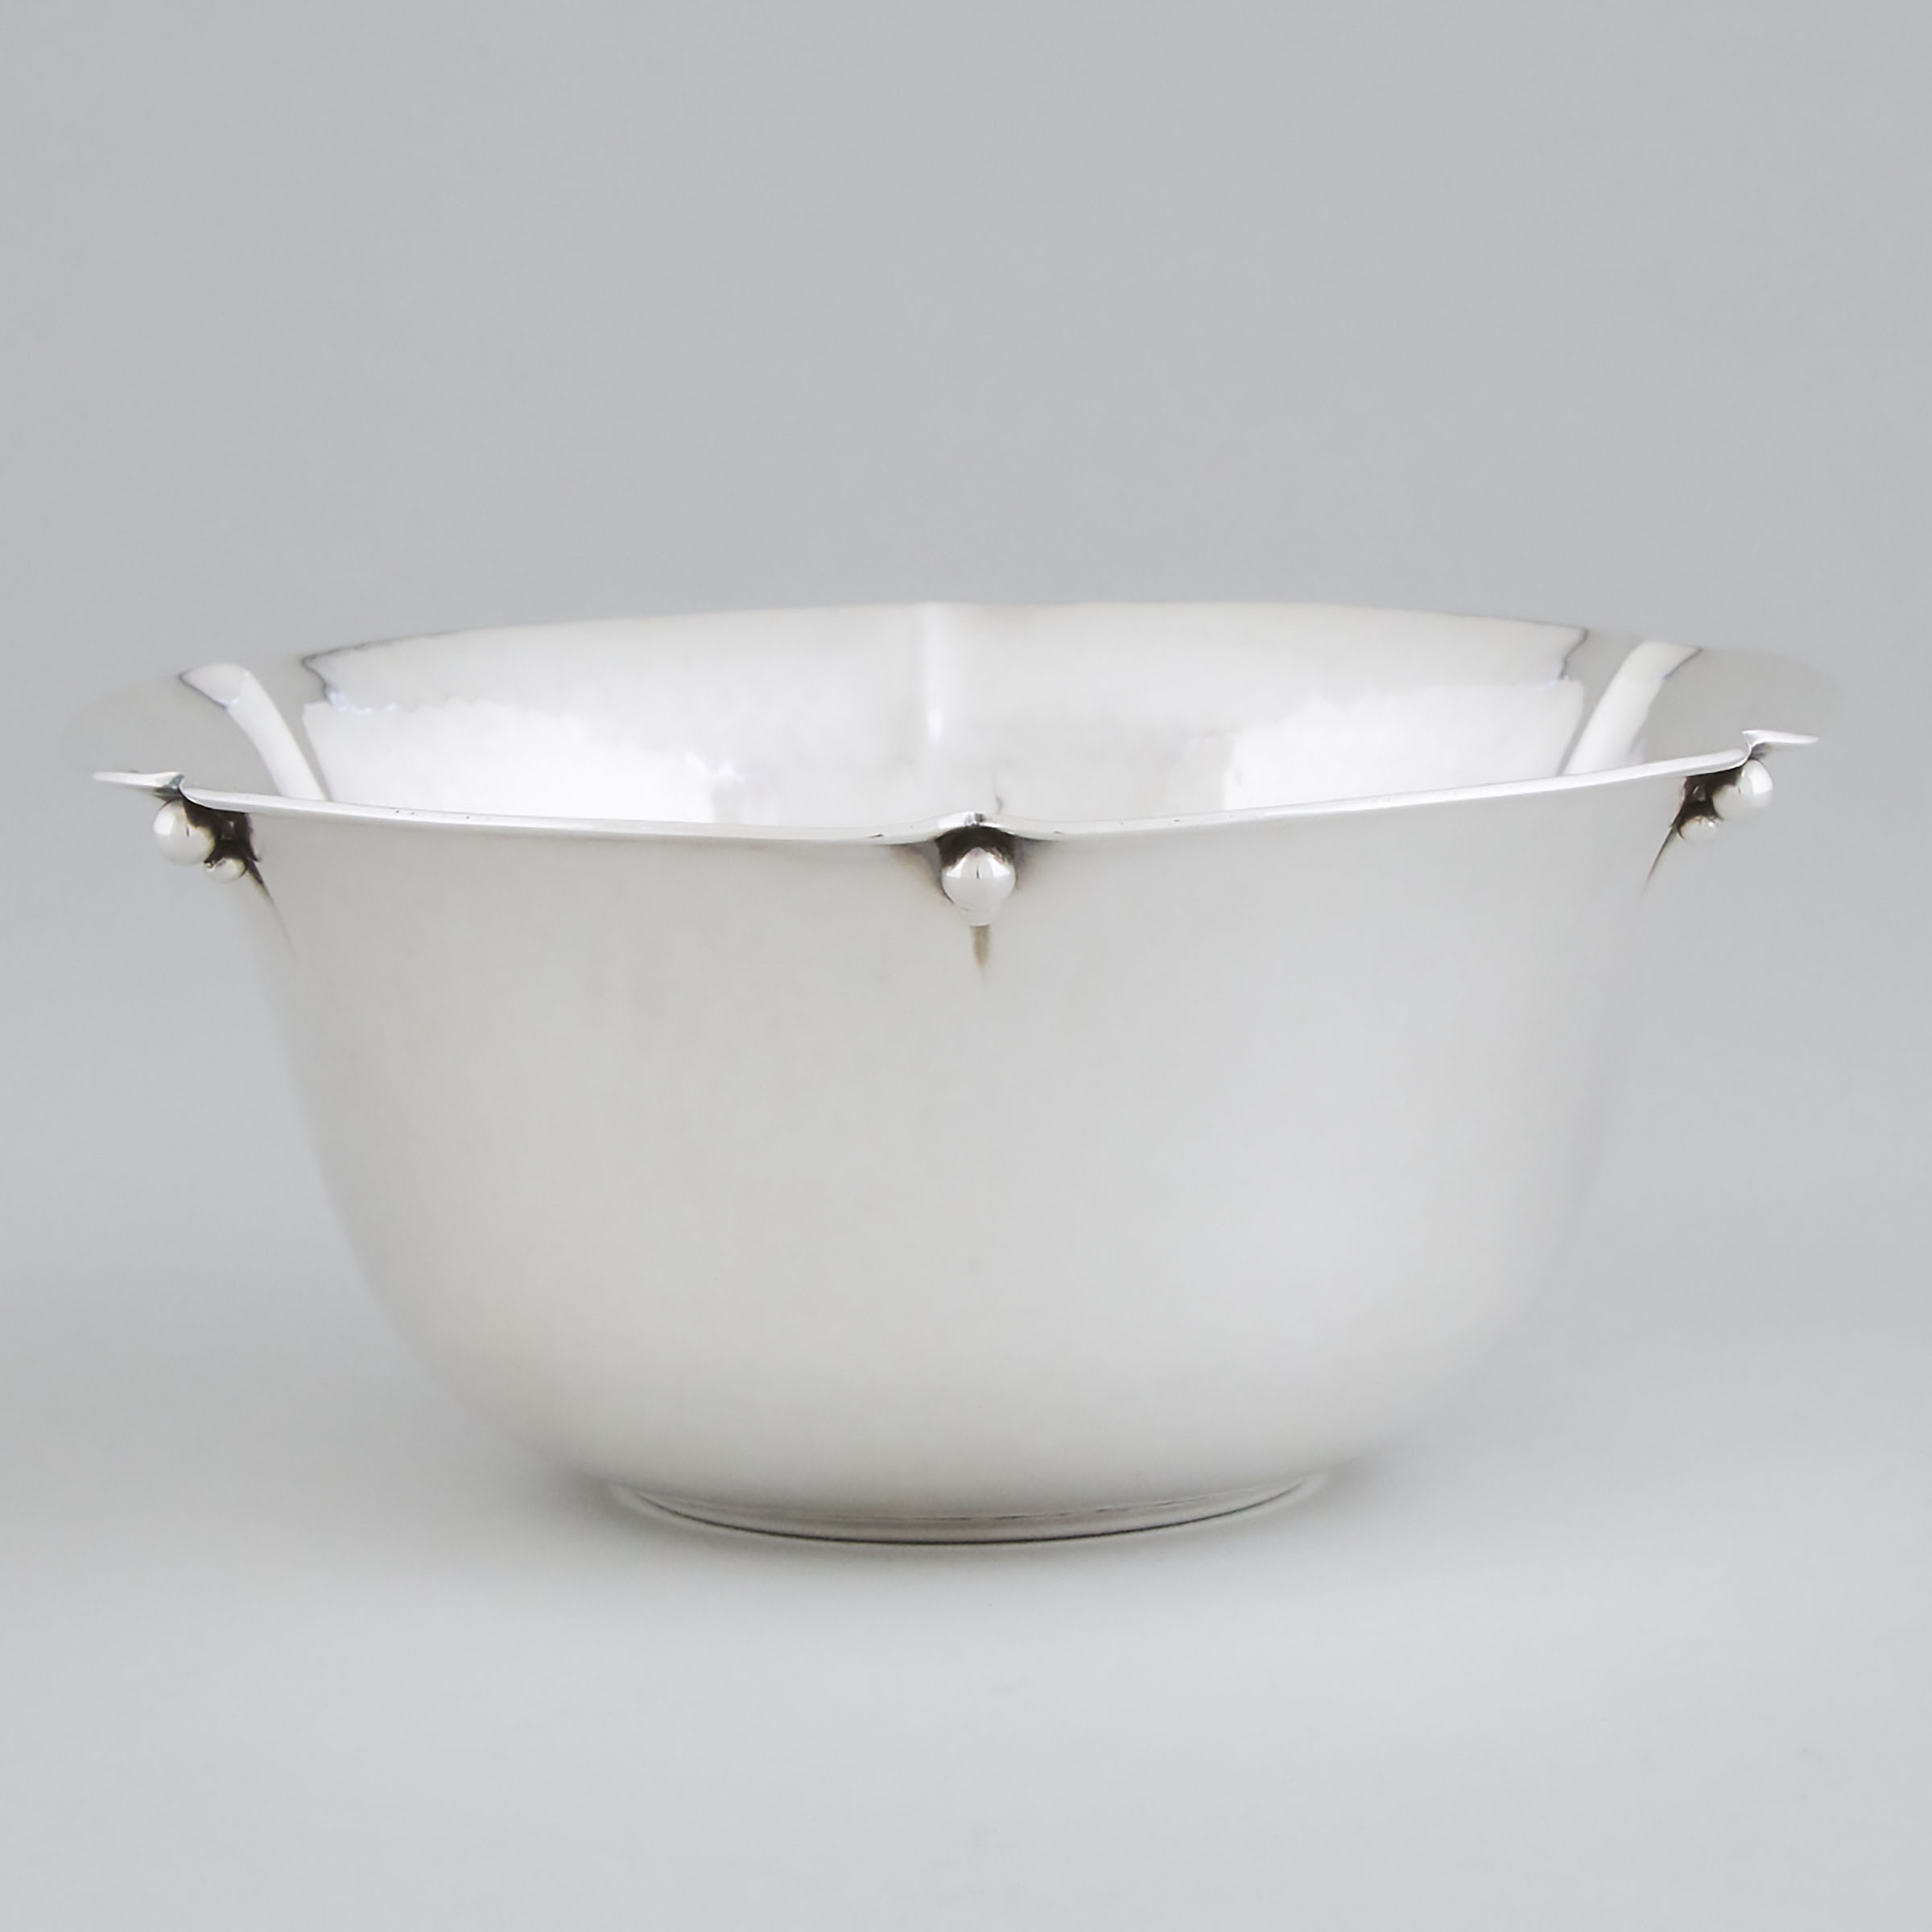 Canadian Silver Bowl, Carl Poul Petersen, Montreal, Que., mid-20th century